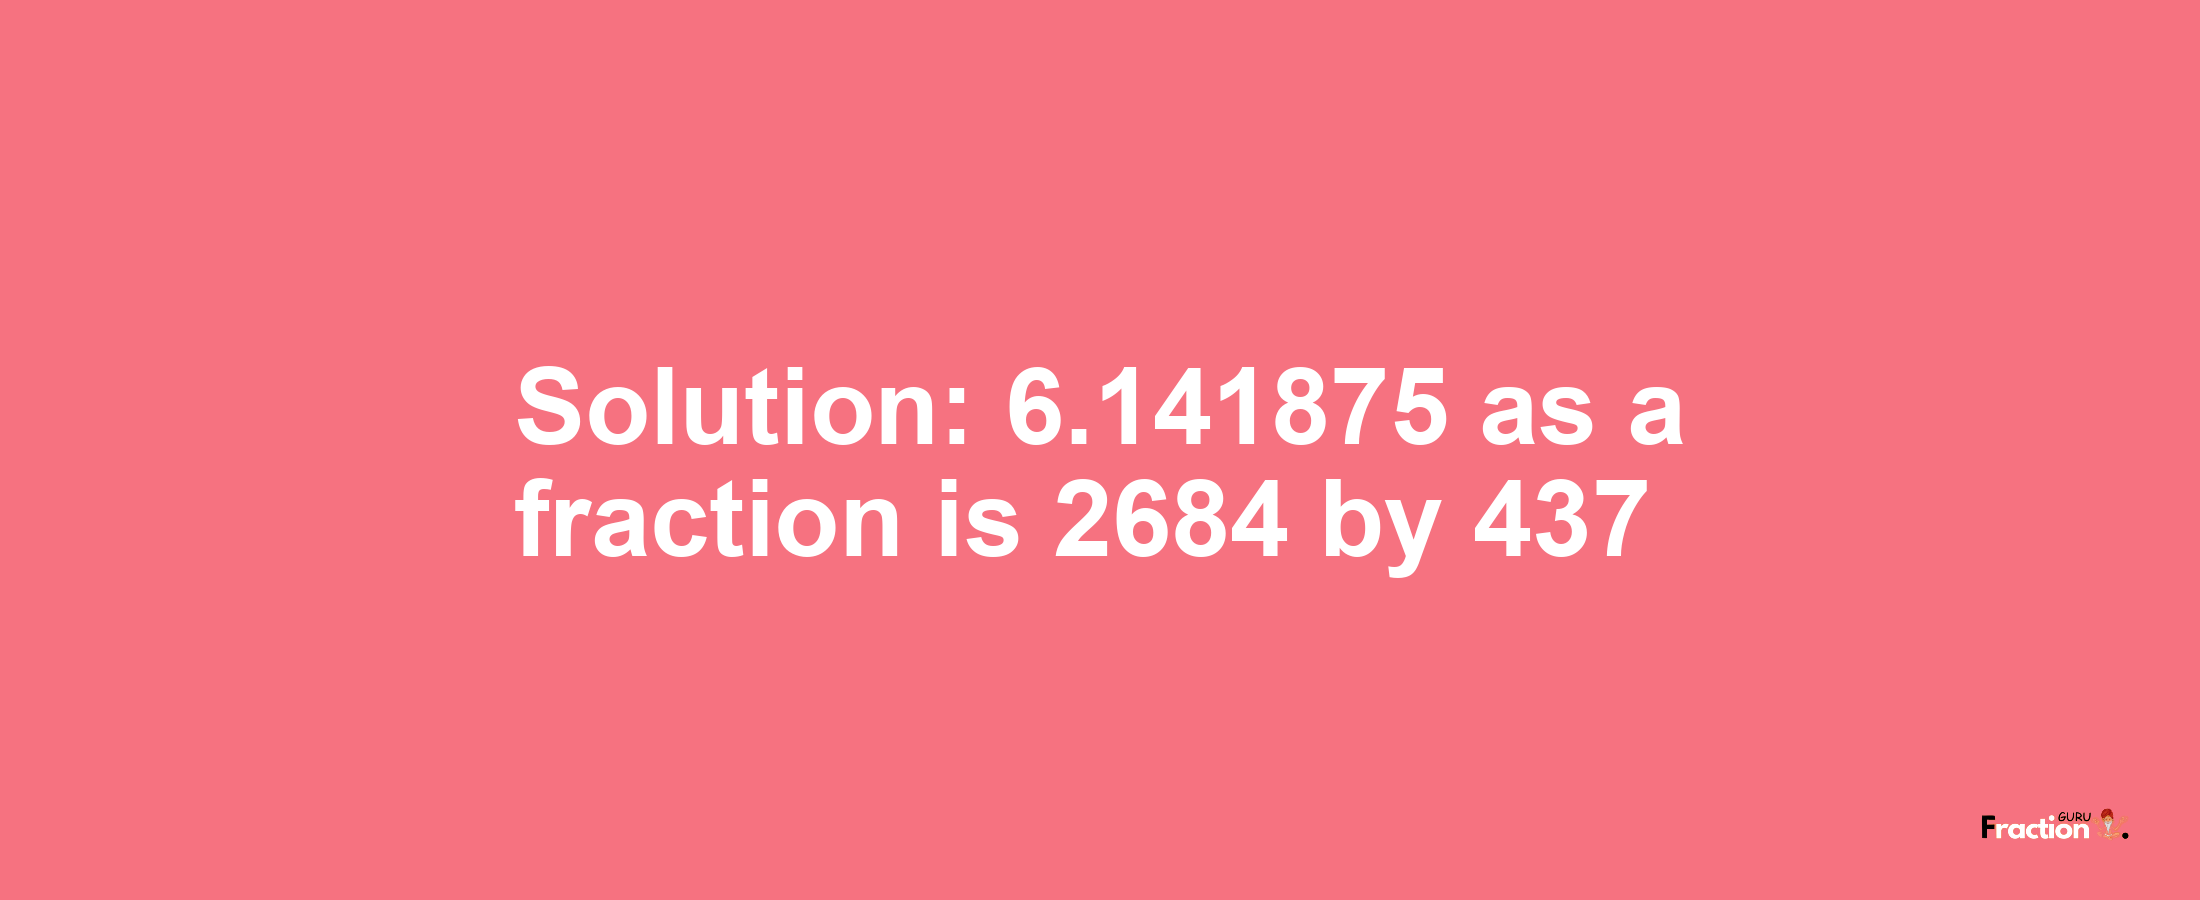 Solution:6.141875 as a fraction is 2684/437